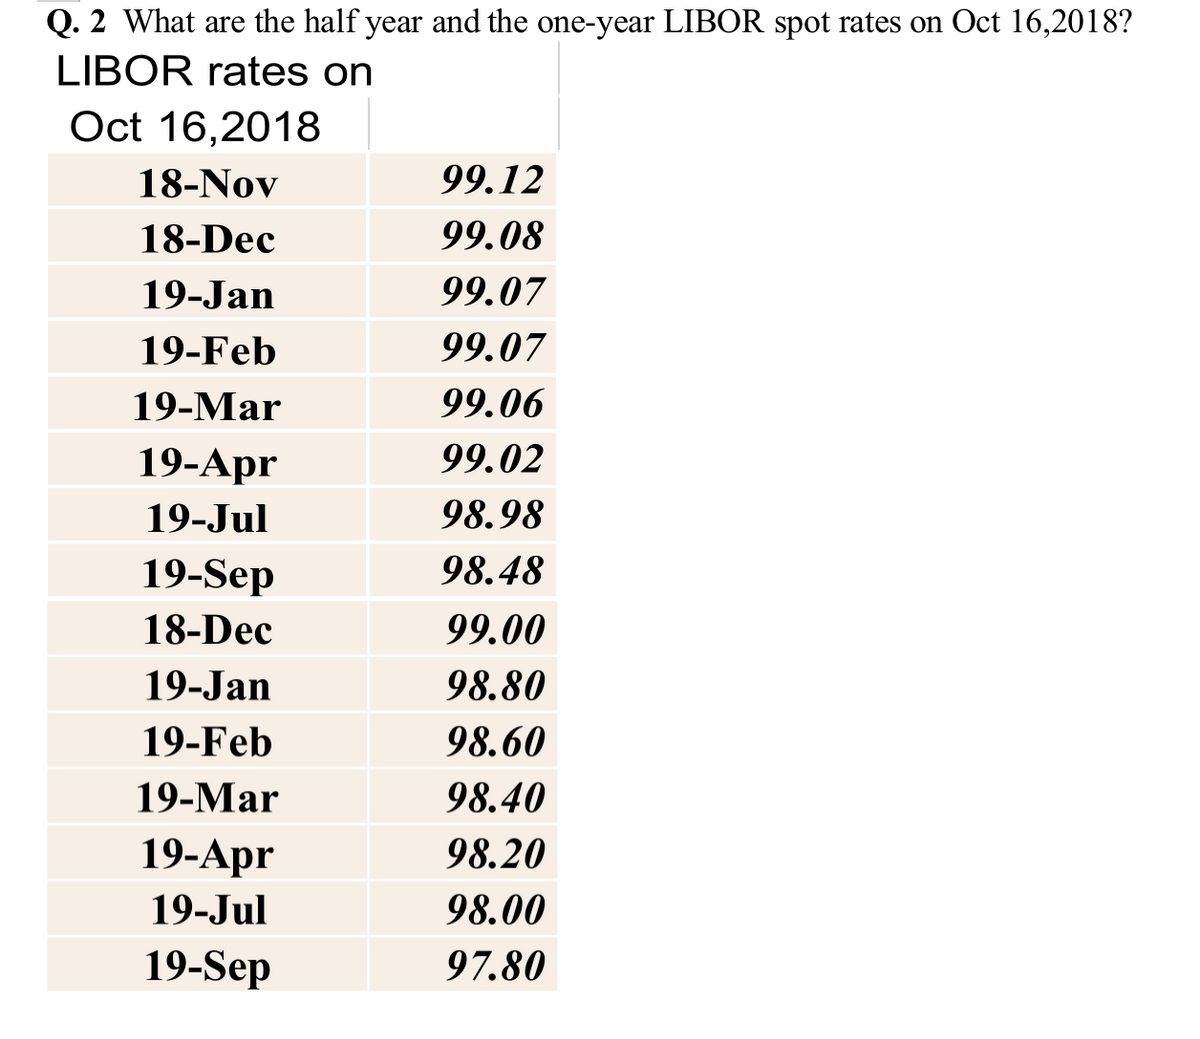 Q. 2 What are the half year and the one-year LIBOR spot rates on Oct 16,2018?
LIBOR rates on
Oct 16,2018
18-Nov
18-Dec
19-Jan
19-Feb
19-Mar
19-Apr
19-Jul
19-Sep
18-Dec
19-Jan
19-Feb
19-Mar
19-Apr
19-Jul
19-Sep
99.12
99.08
99.07
99.07
99.06
99.02
98.98
98.48
99.00
98.80
98.60
98.40
98.20
98.00
97.80